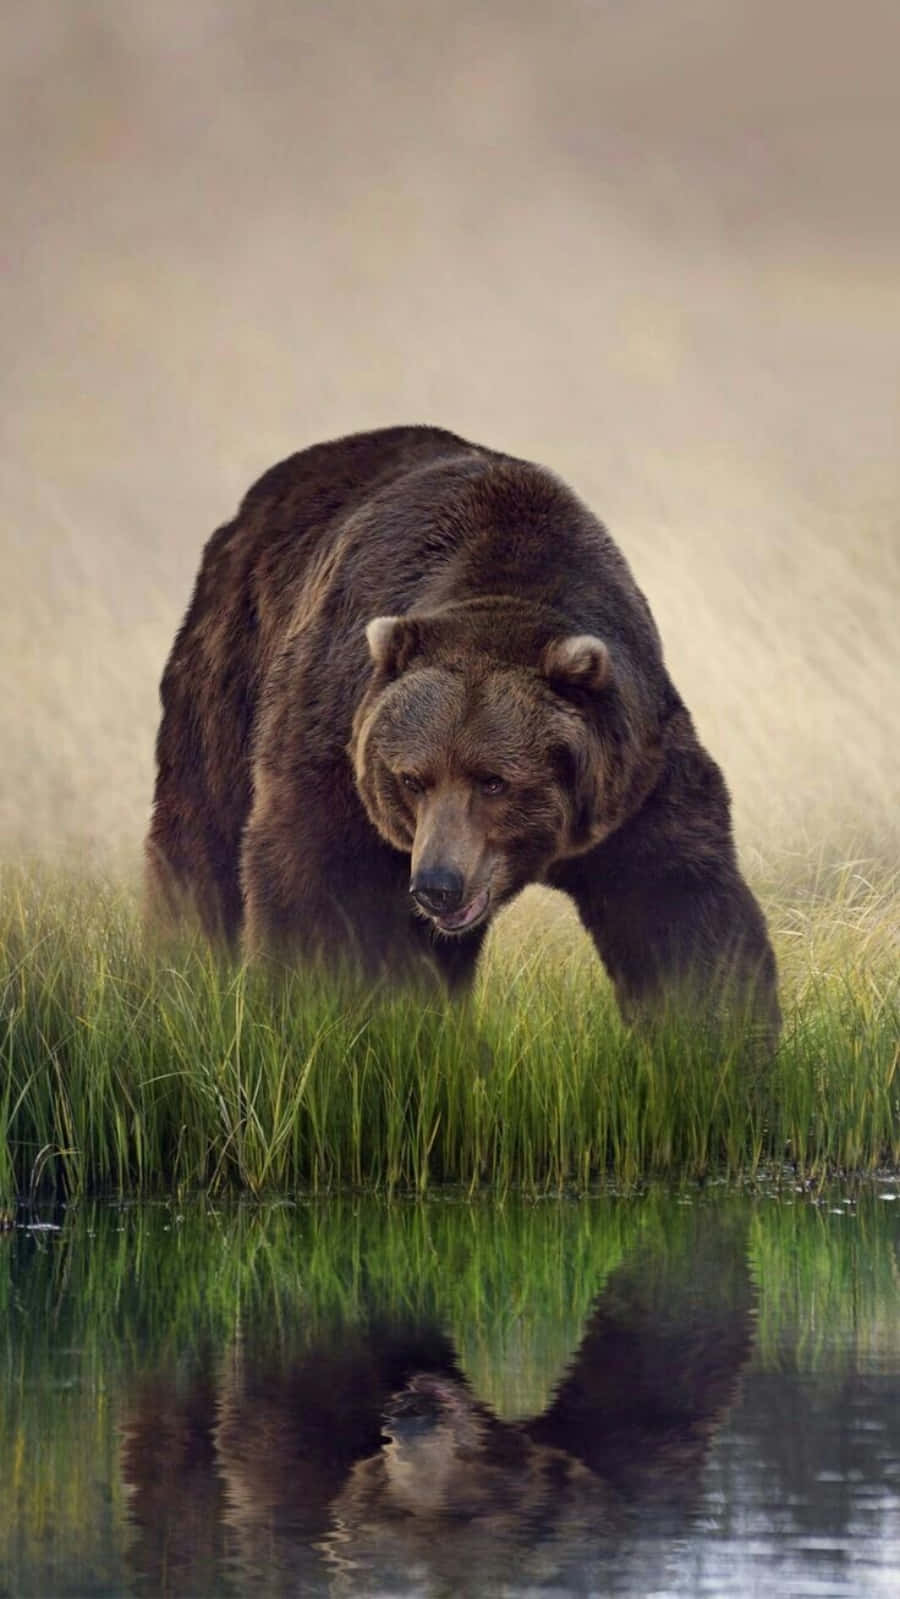 A restless brown bear looking for his next meal